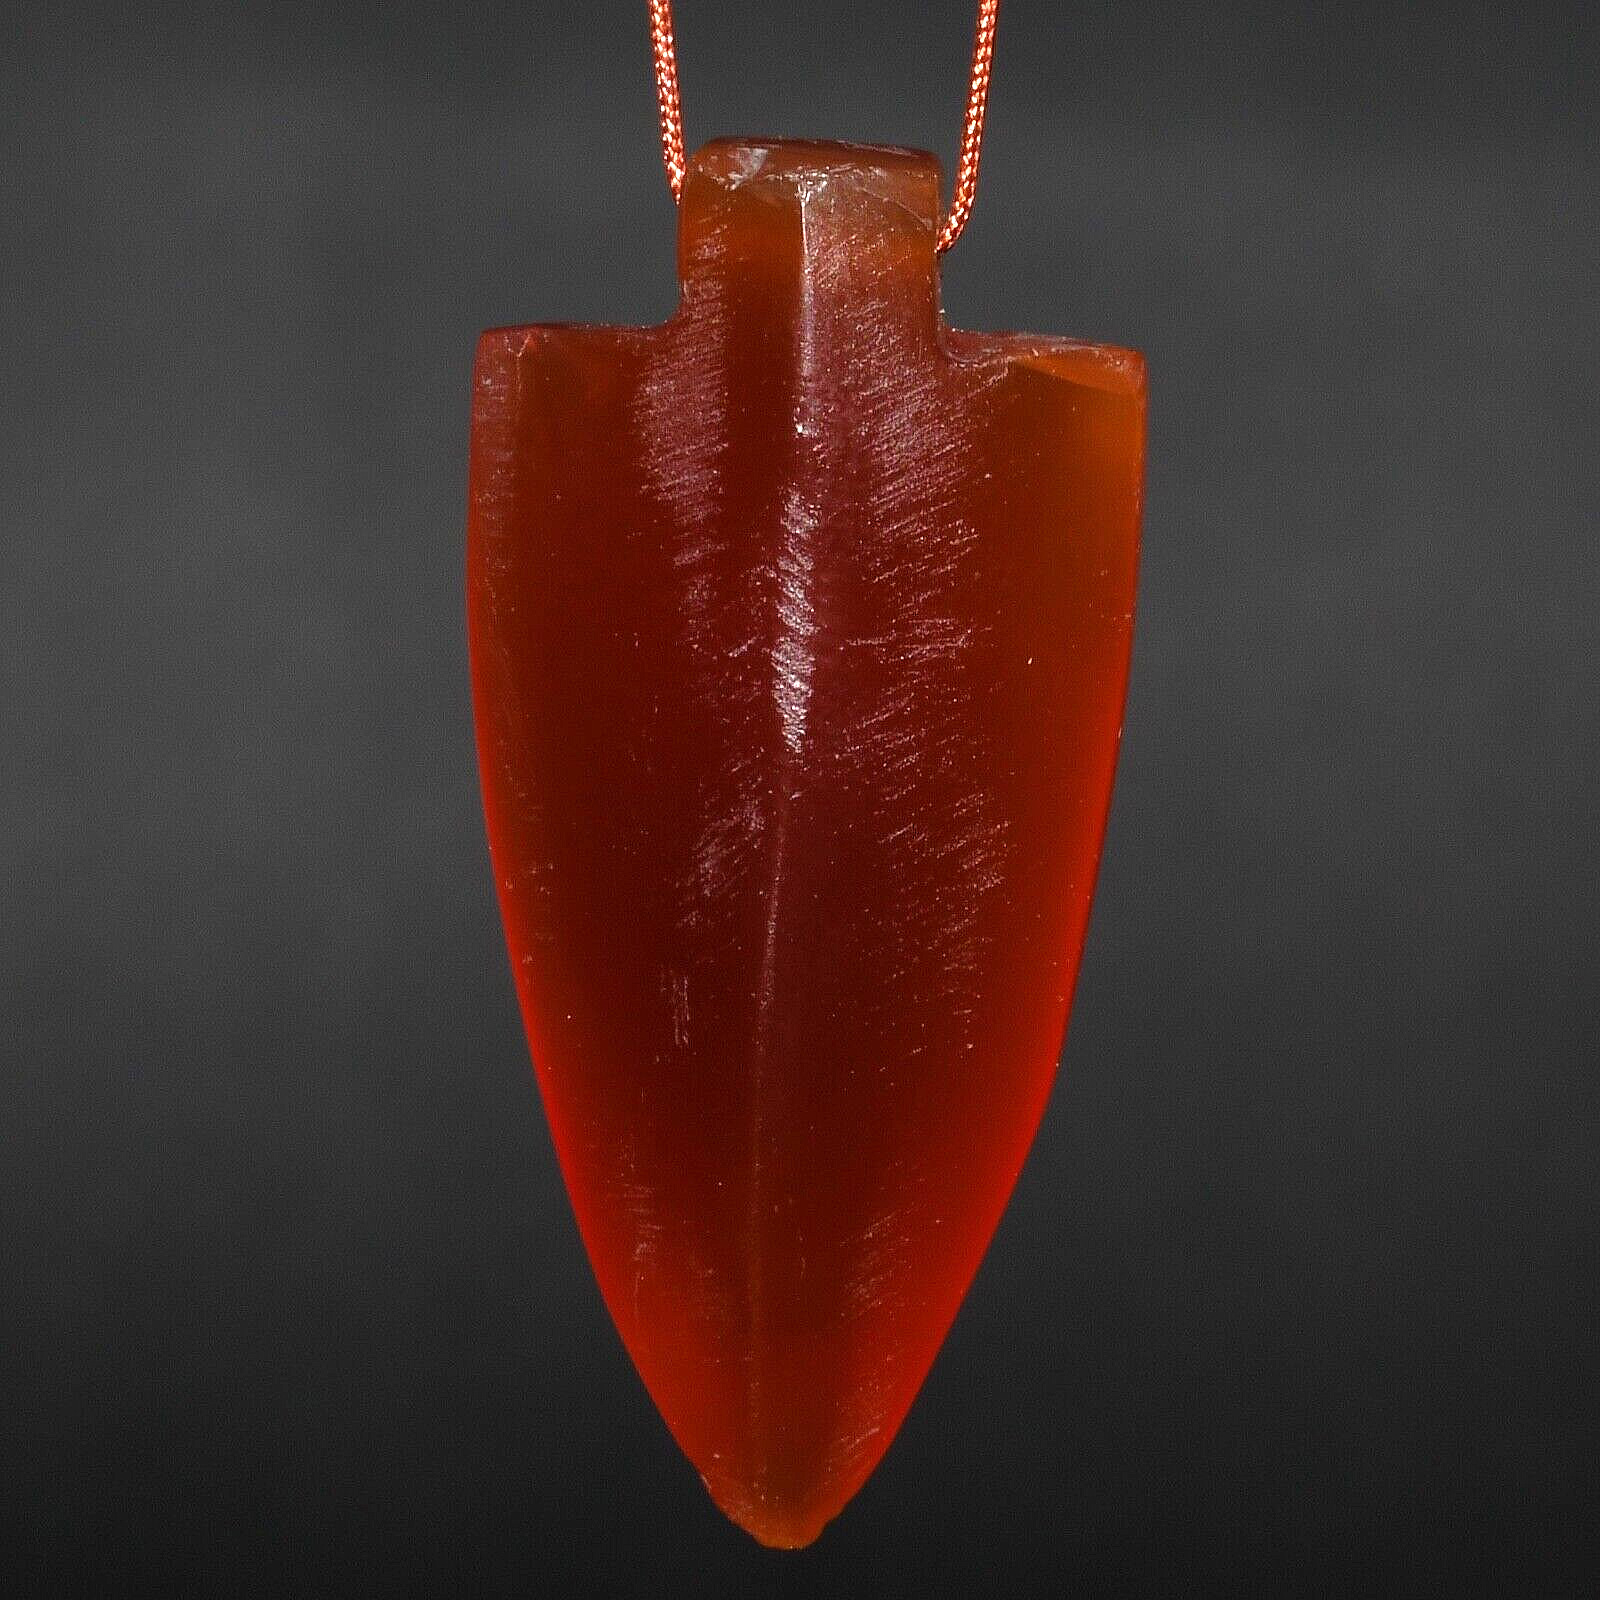 Ancient Old Pyu Culture Arrowhead Carnelian Amulet Bead in Perfect Condition